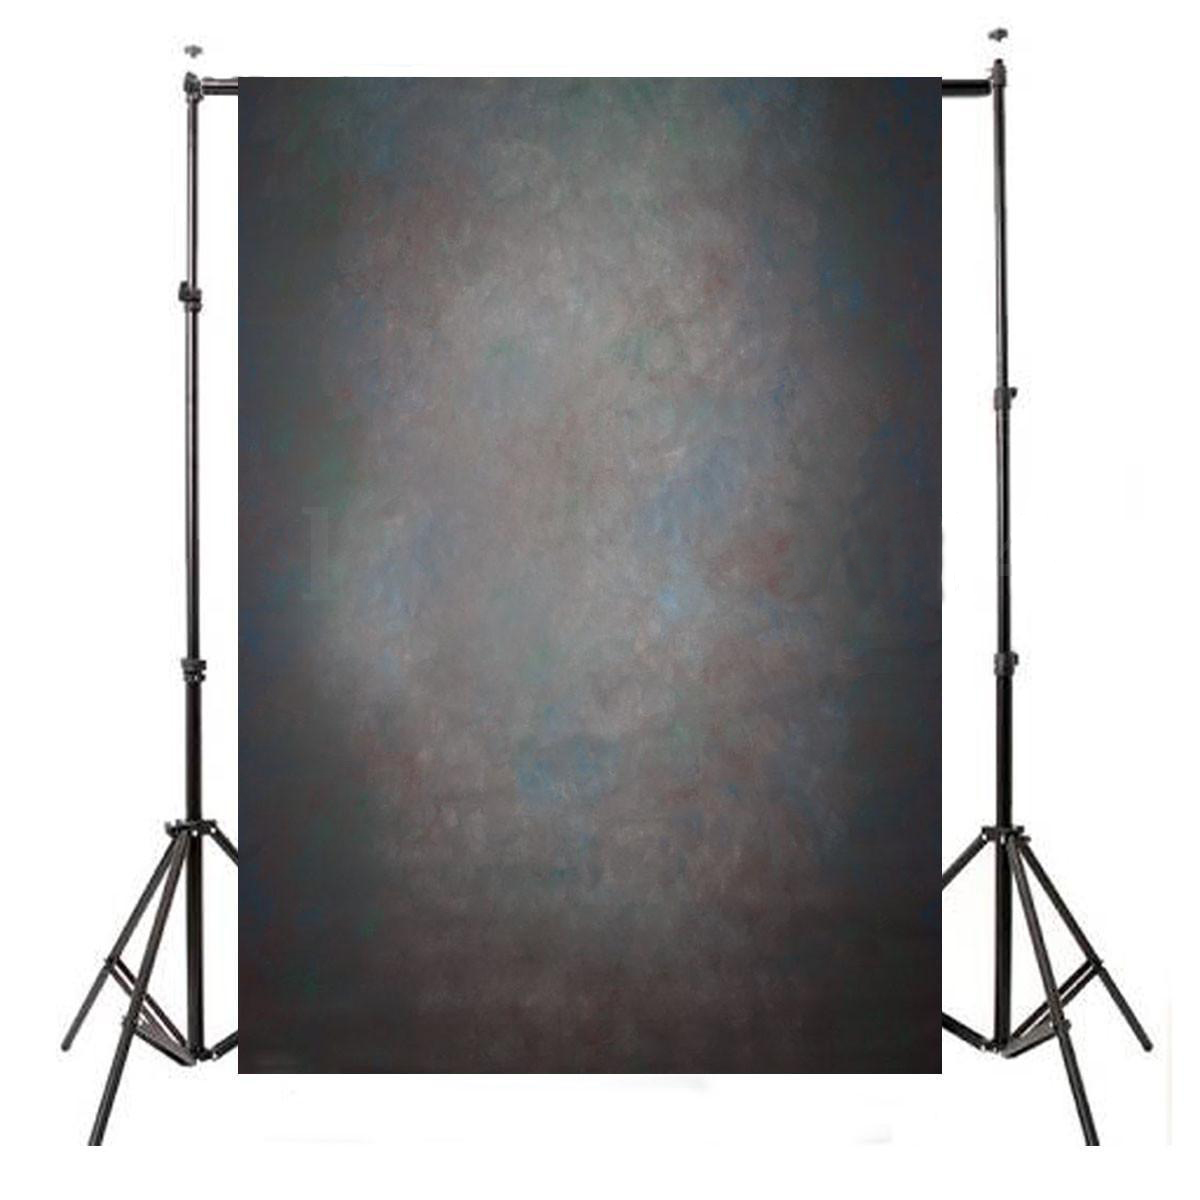 YouLoveIt Studio Photo Video Photography Backdrops 5x7ft Studio Photo Video Background Screen Props Camera & Photo Studio Props, 20+ colors - image 4 of 4